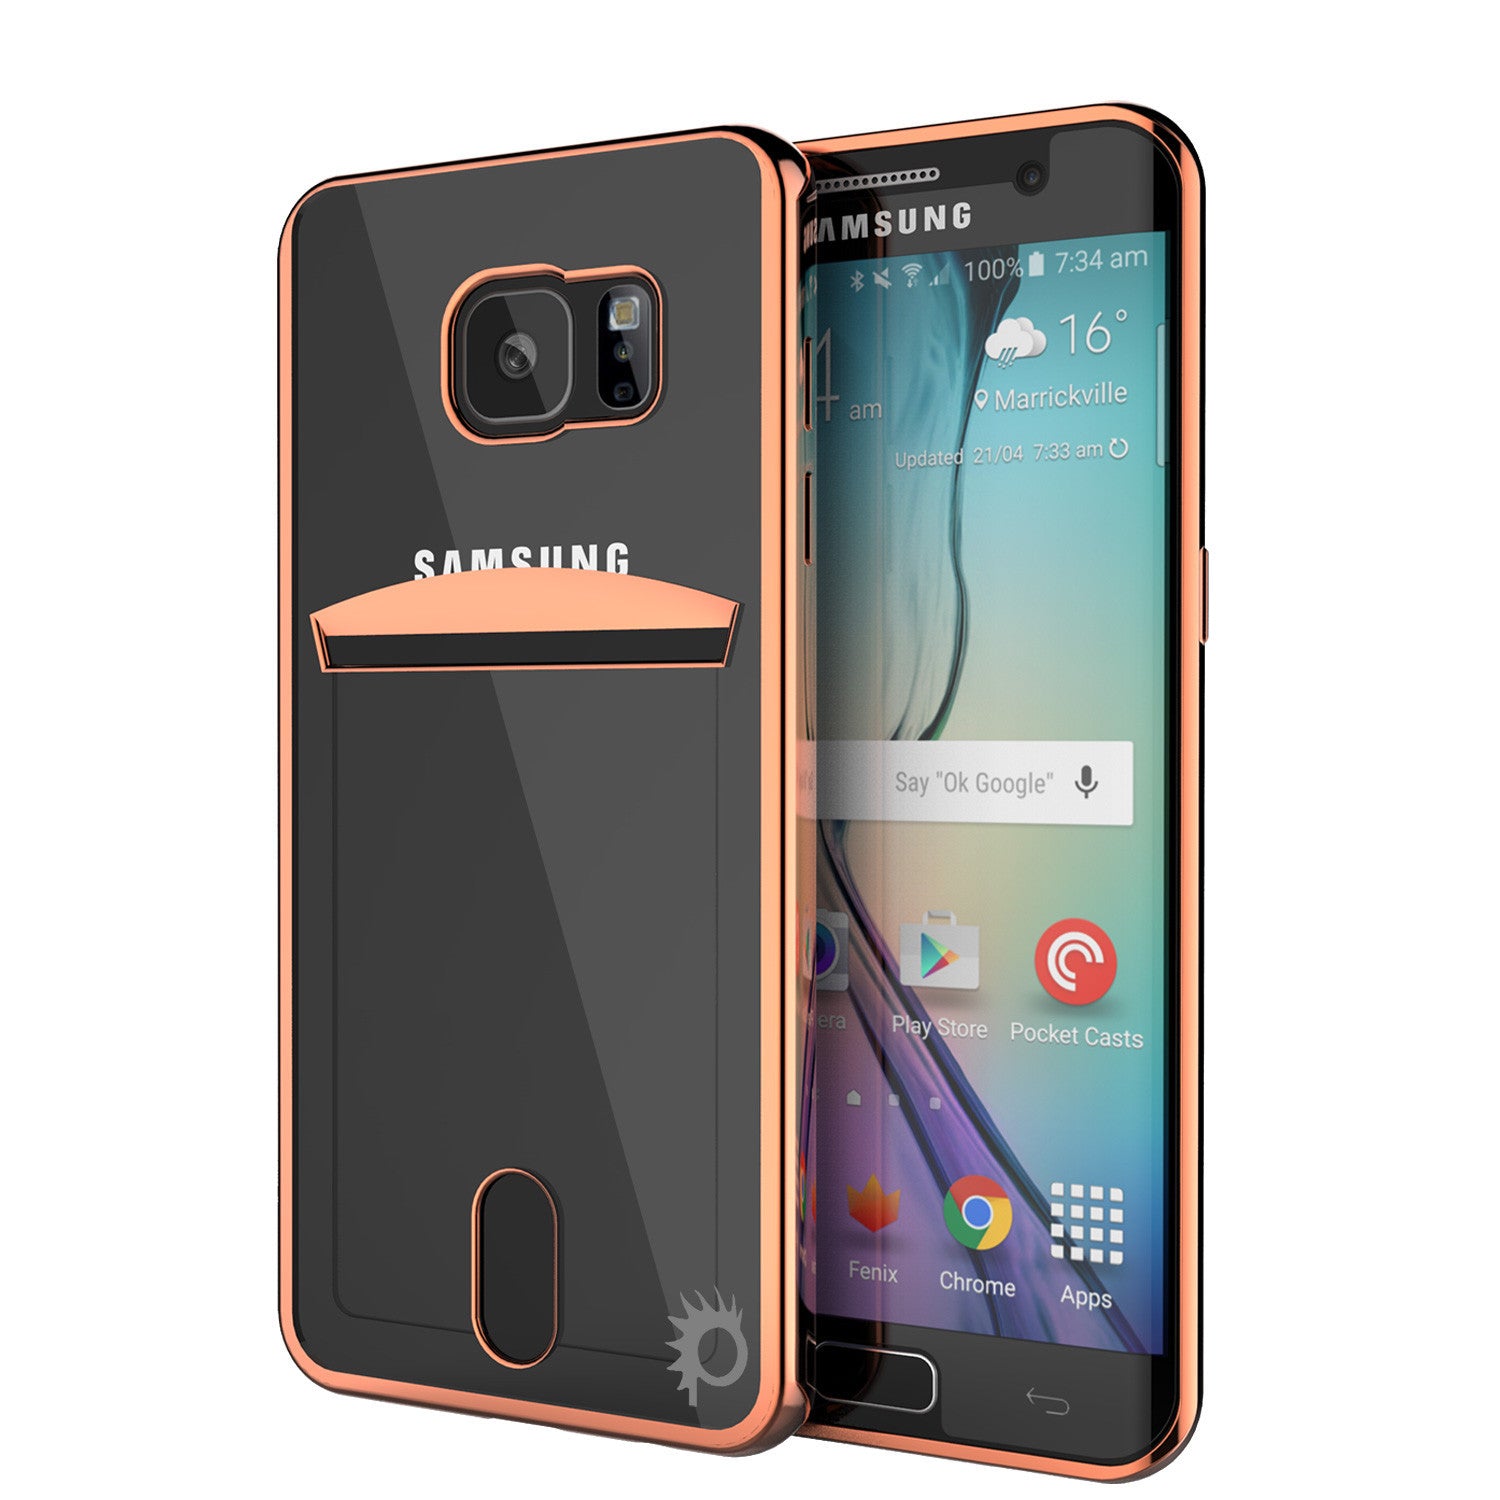 Galaxy S6 Case, PUNKCASE® LUCID Rose Gold Series | Card Slot | SHIELD Screen Protector | Ultra fit (Color in image: Rose Gold)